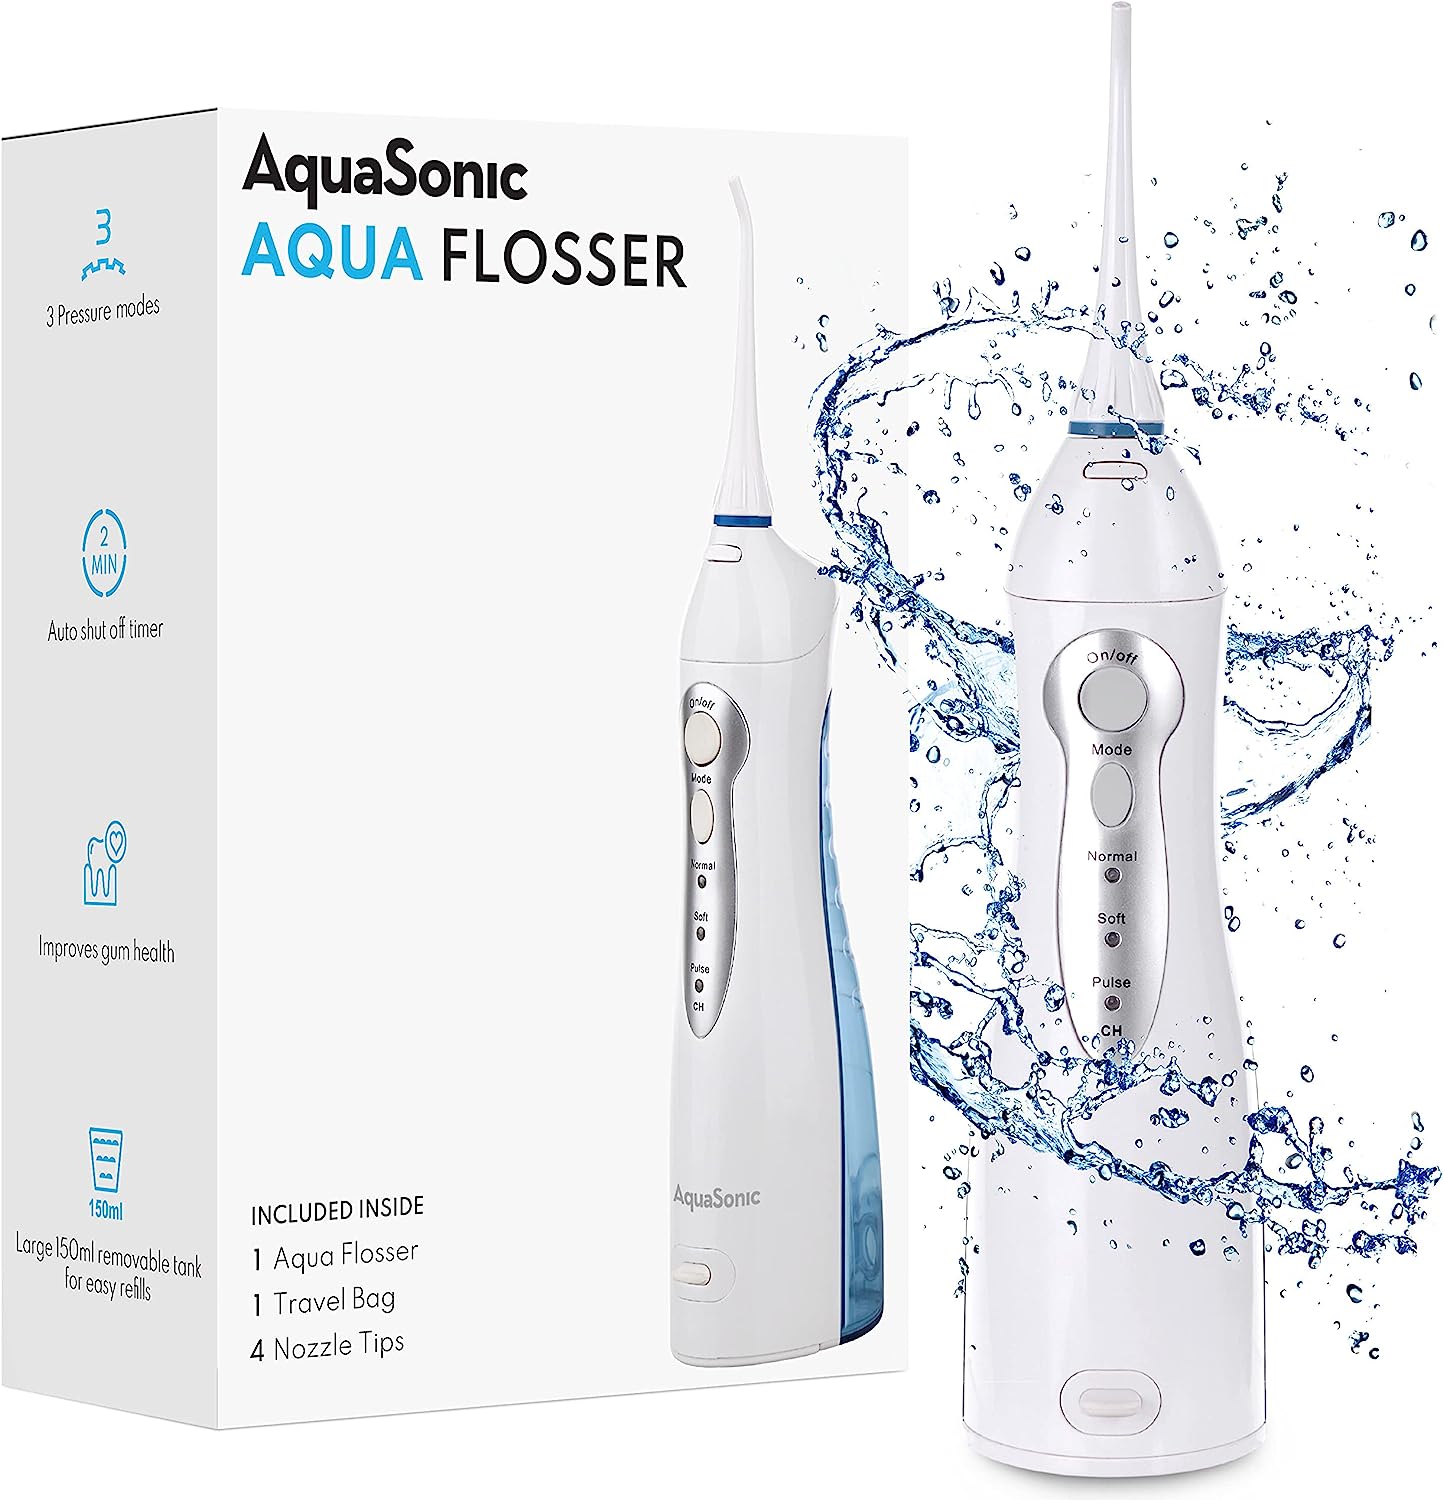 Aquasonic Water Flosser Cordless Rechargeable Oral Irrigator for Kids and Adults, White - image 2 of 6